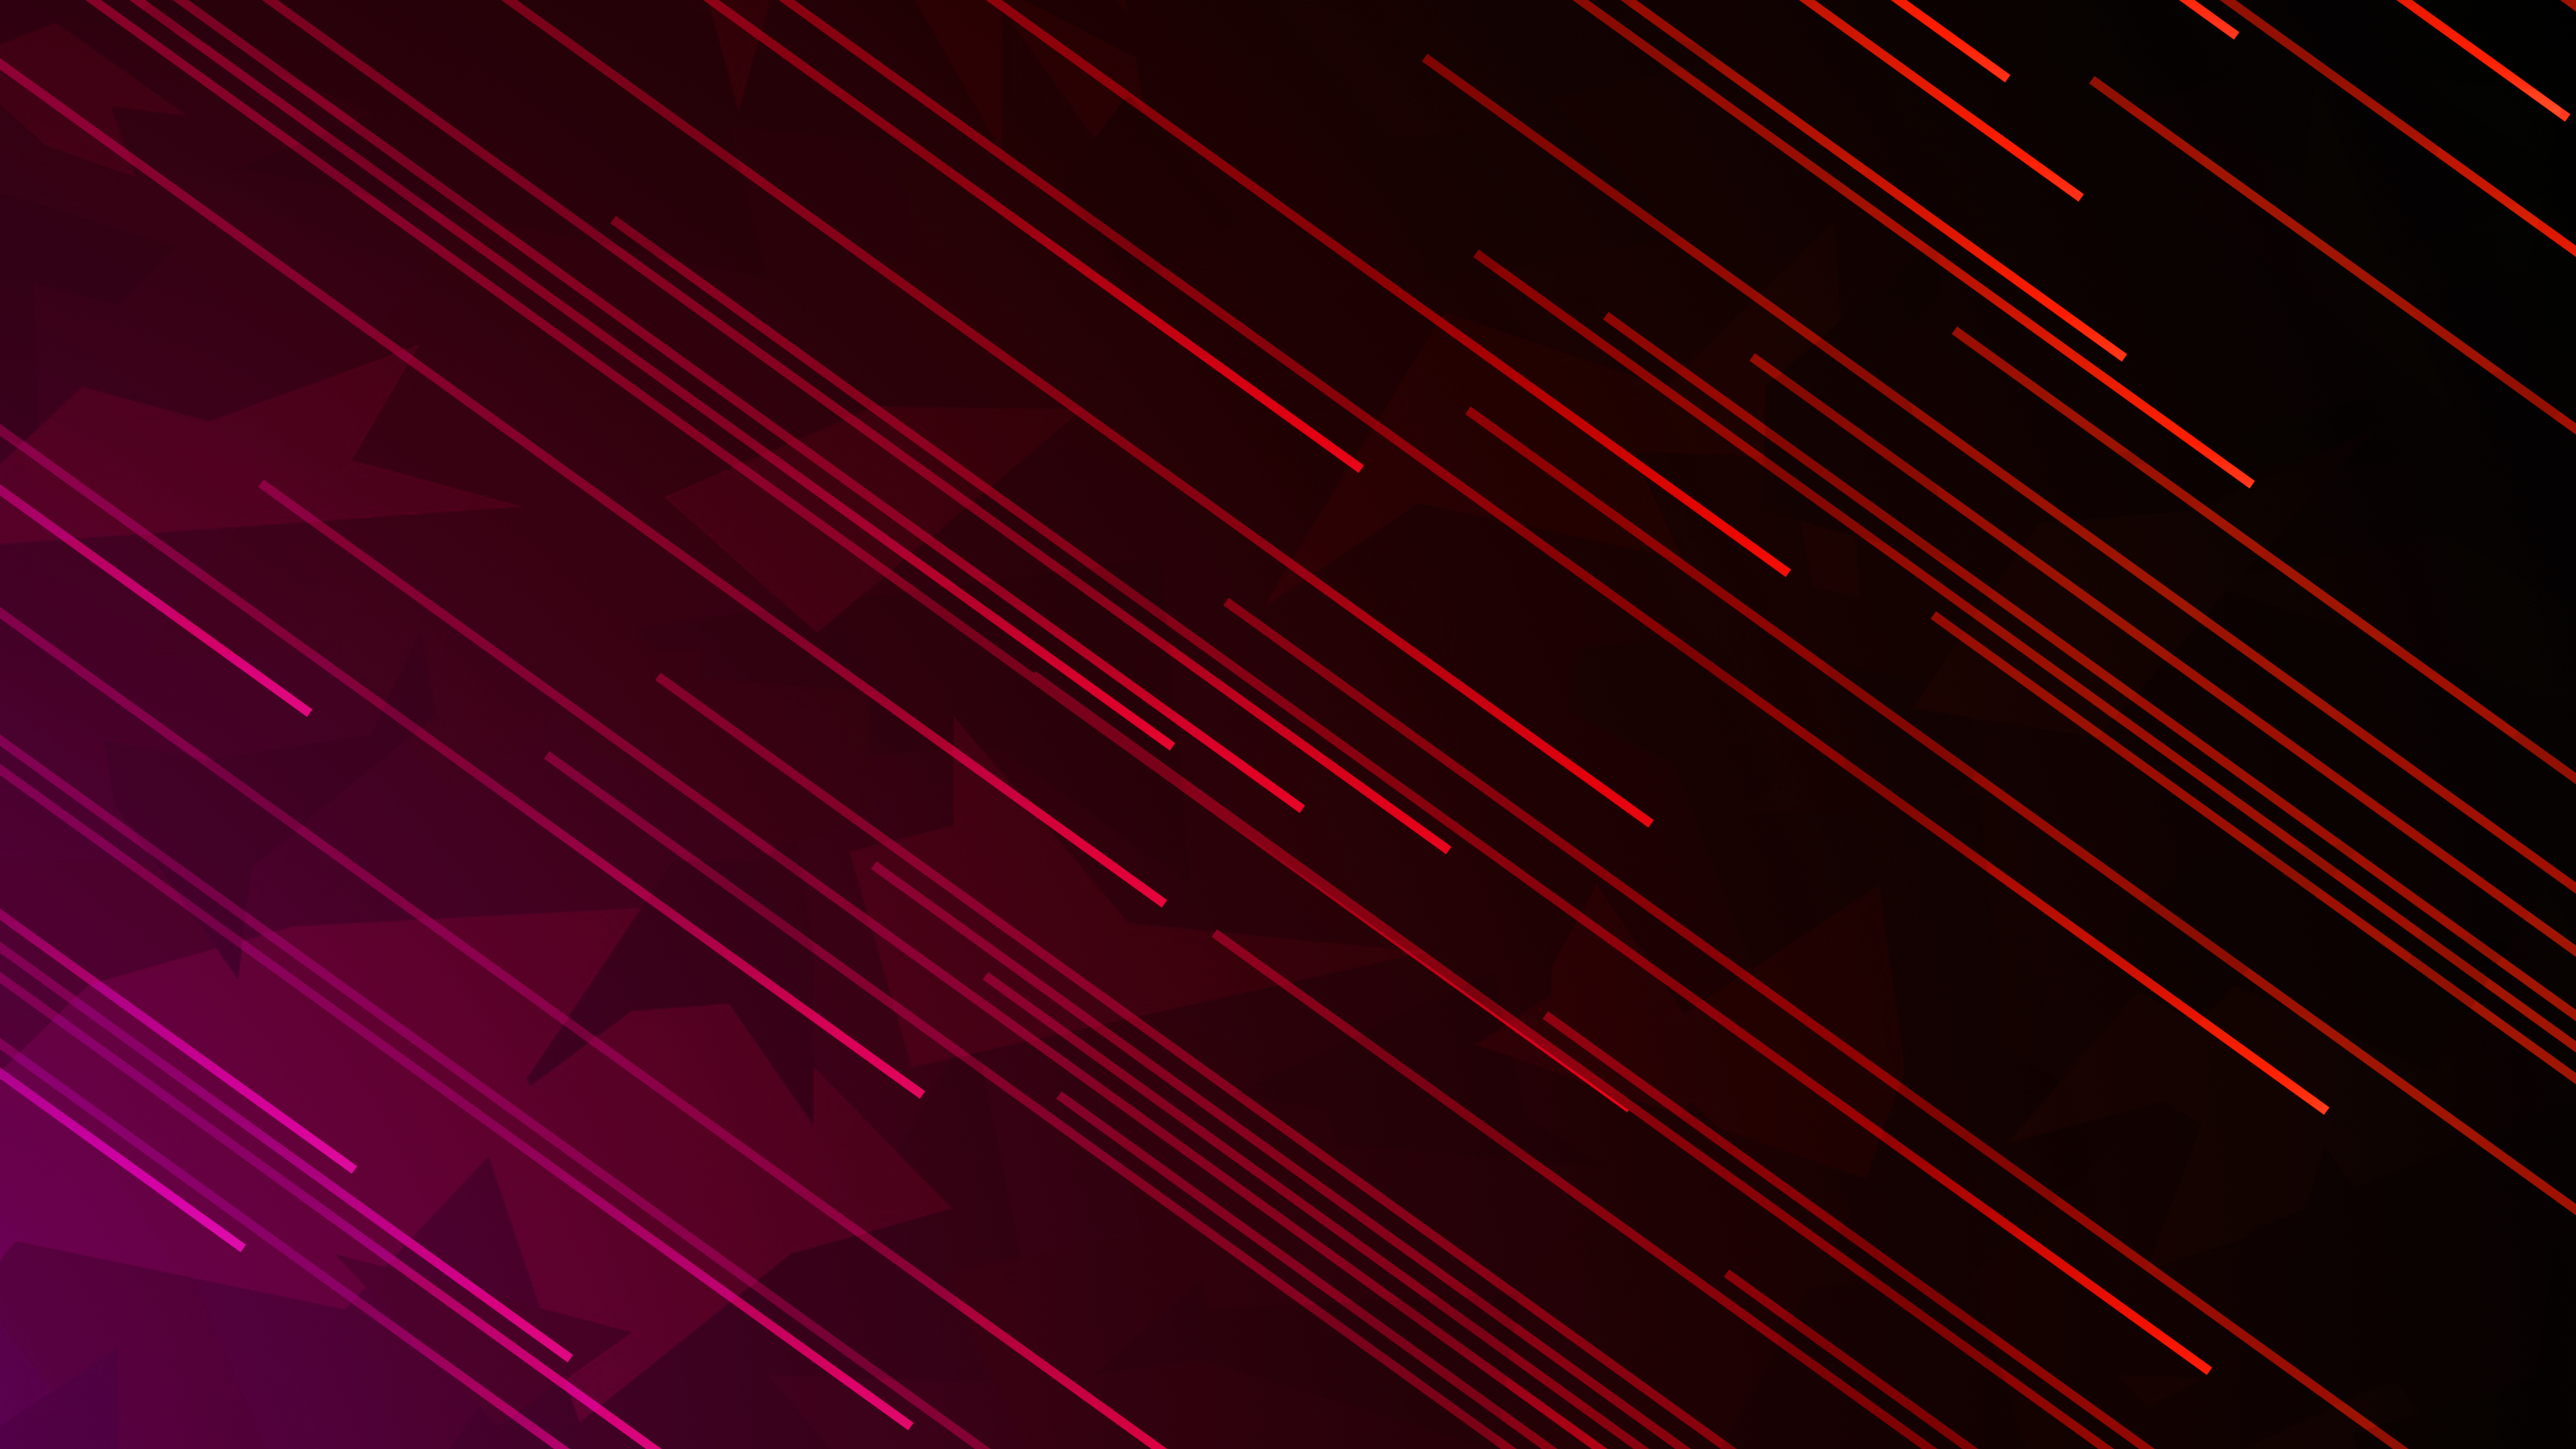 20 Laser HD Wallpapers and Backgrounds